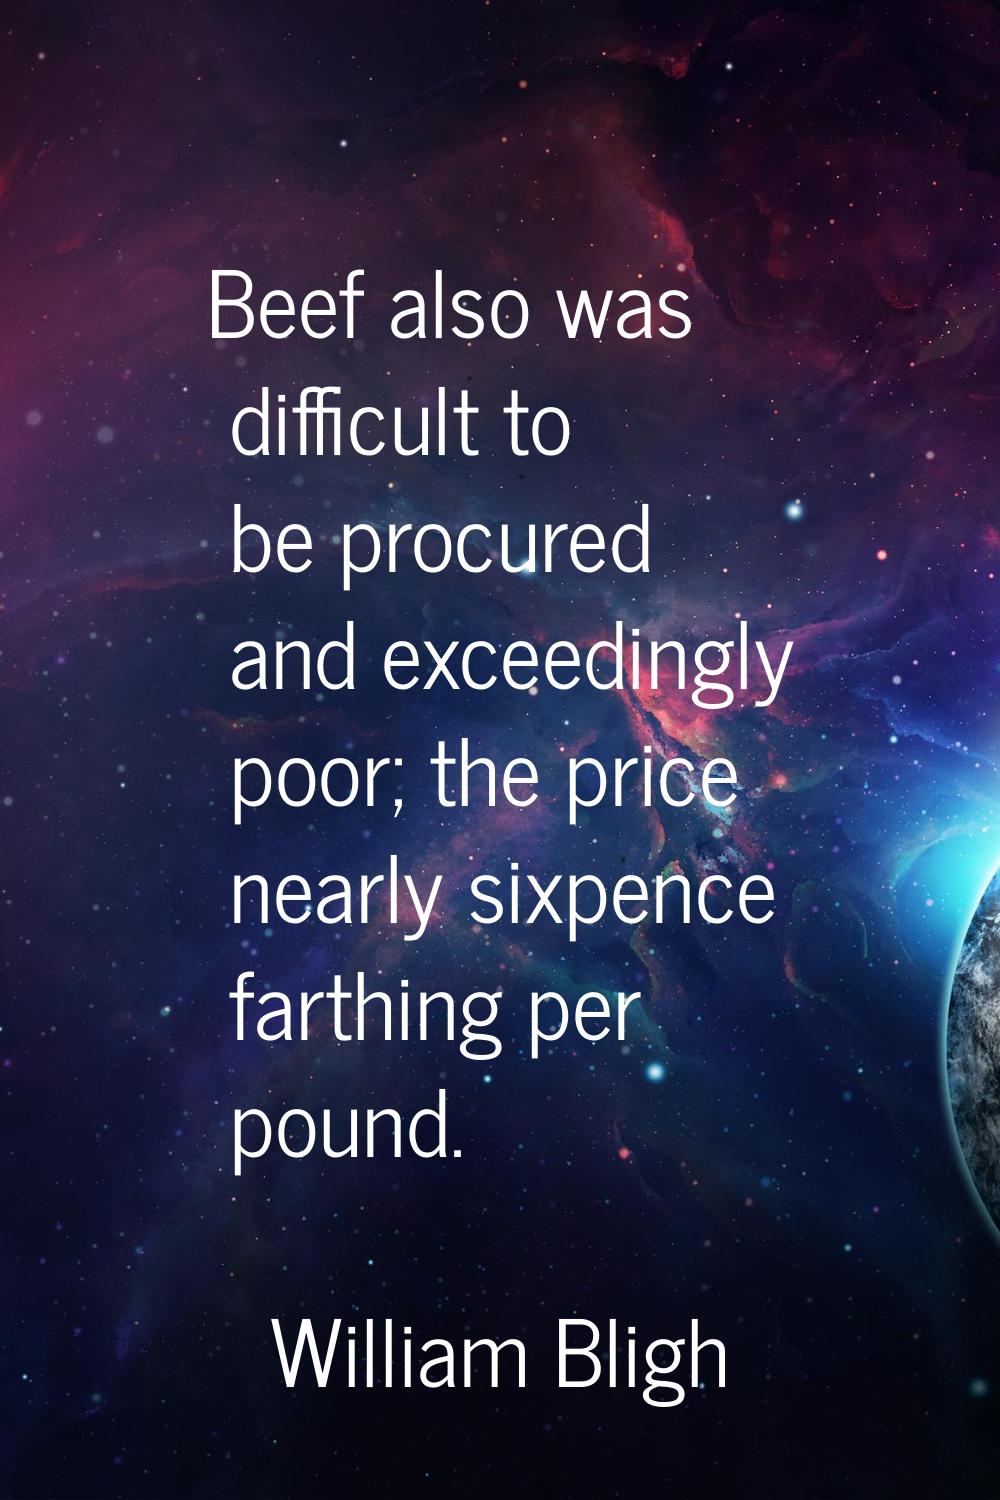 Beef also was difficult to be procured and exceedingly poor; the price nearly sixpence farthing per